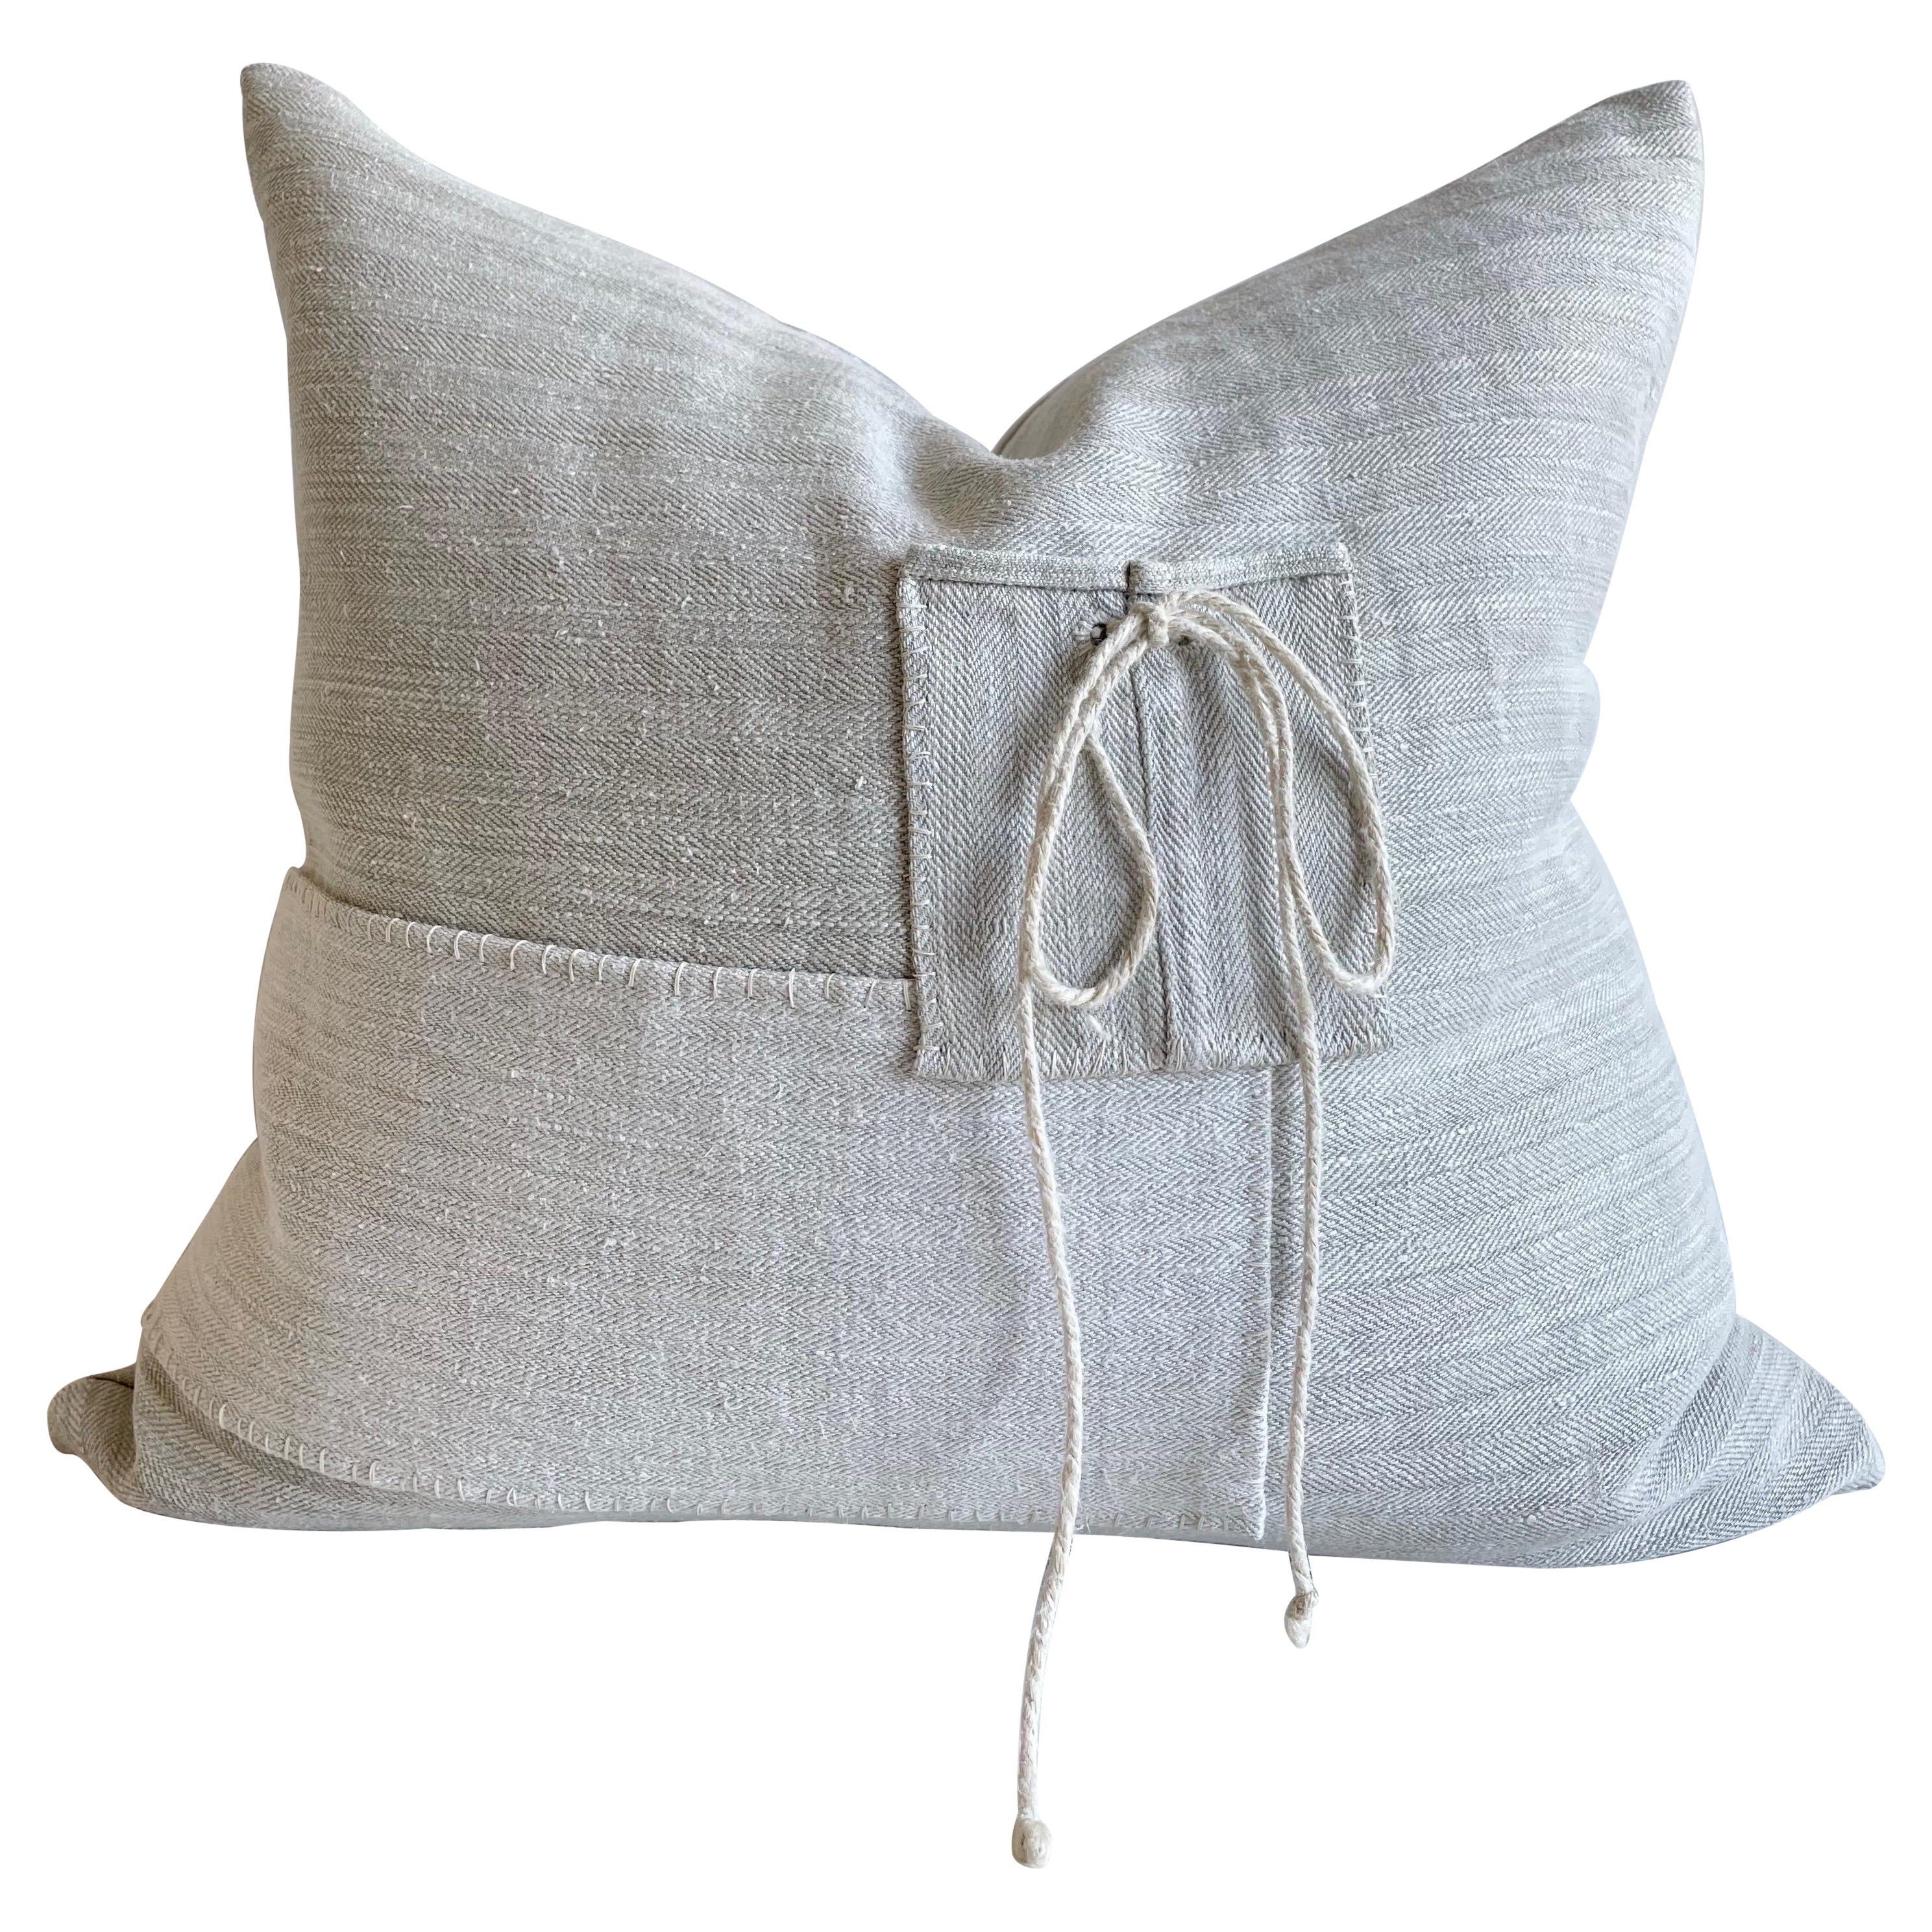 Original Patchwork Grain Sack Pillow with Linen and Down Feather Insert For Sale